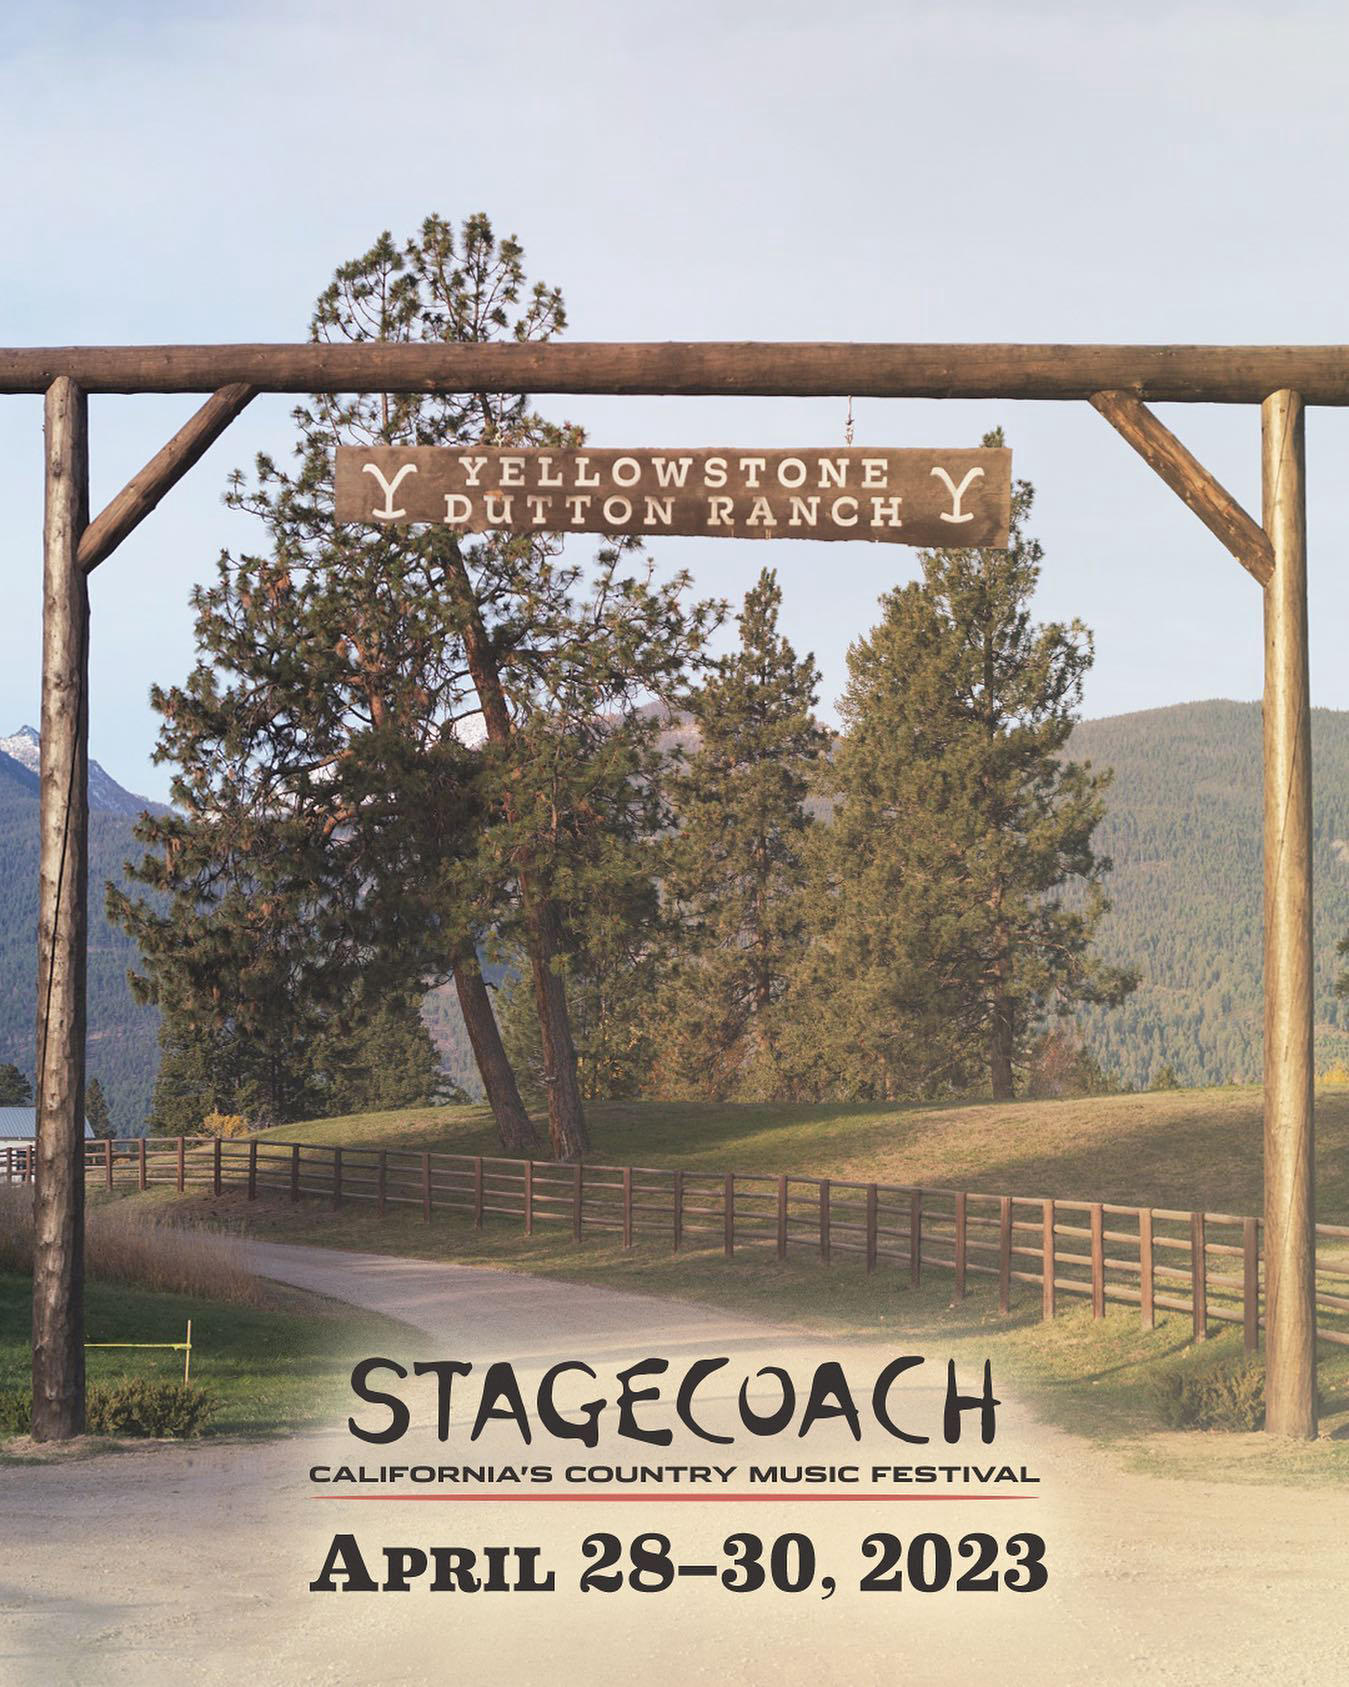 The #Yellowstone Dutton Ranch is hitting the road and relocating to California’s  #Stagecoach Festiv